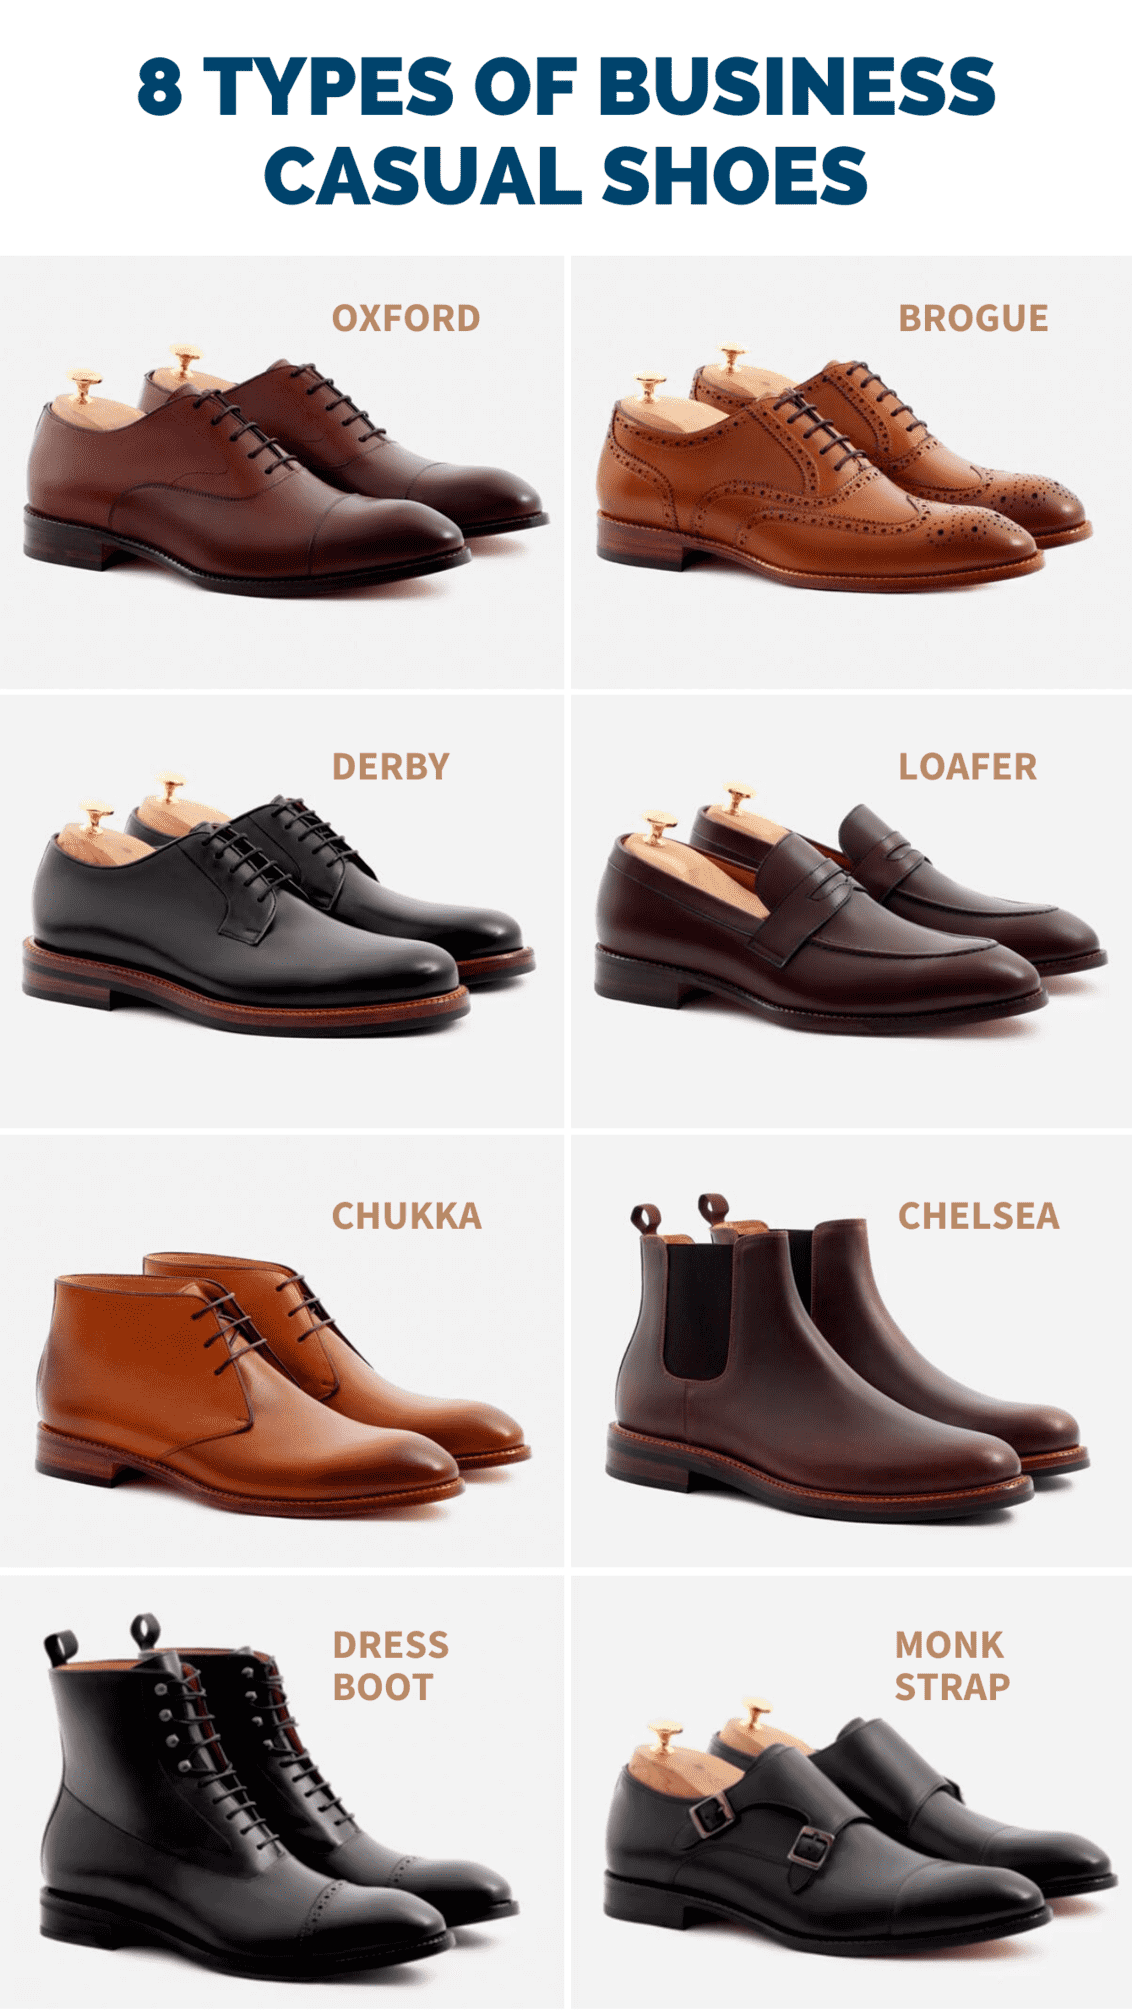 casual men's leather shoes